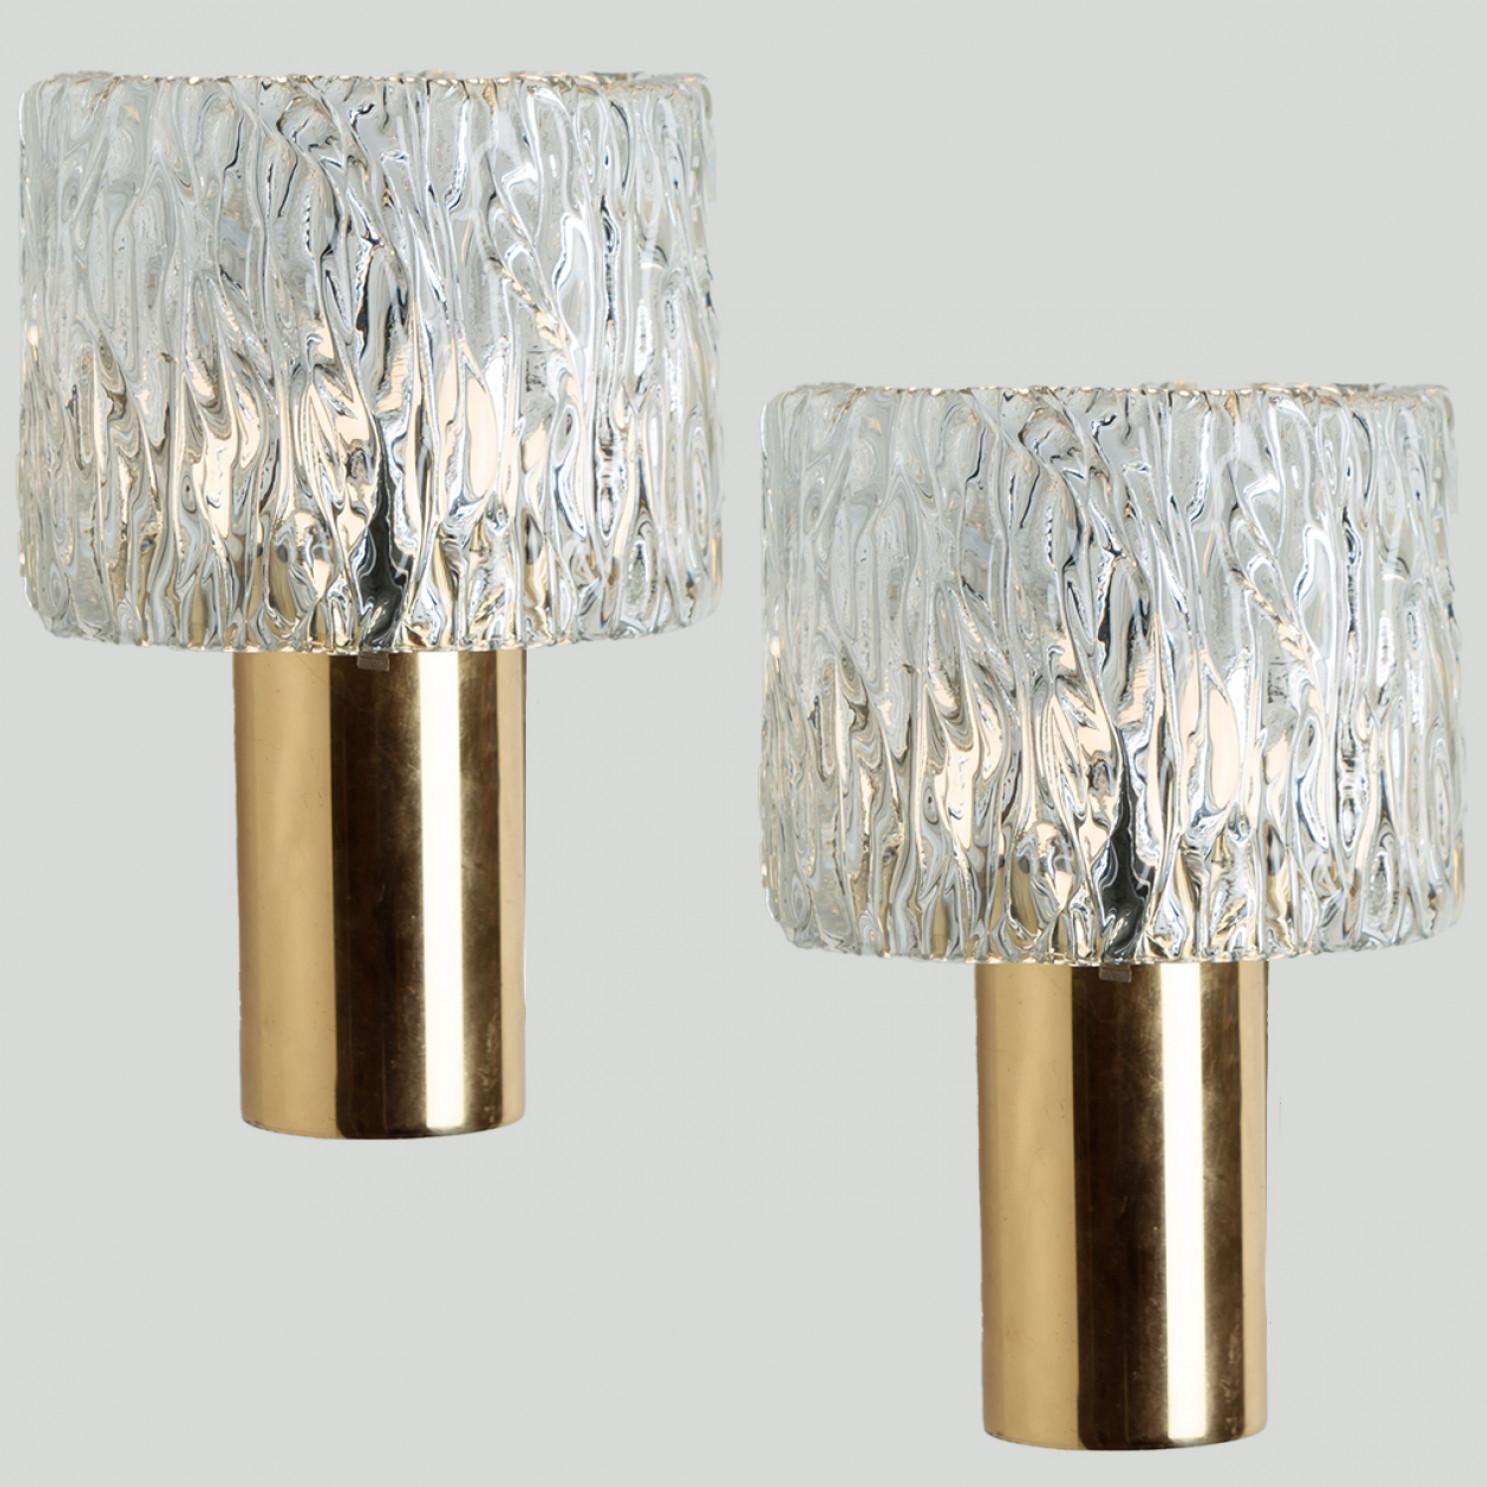 1 of the 2 Pairs of Glass Torch Wall Sconces by Fagerlund, 1960 For Sale 7